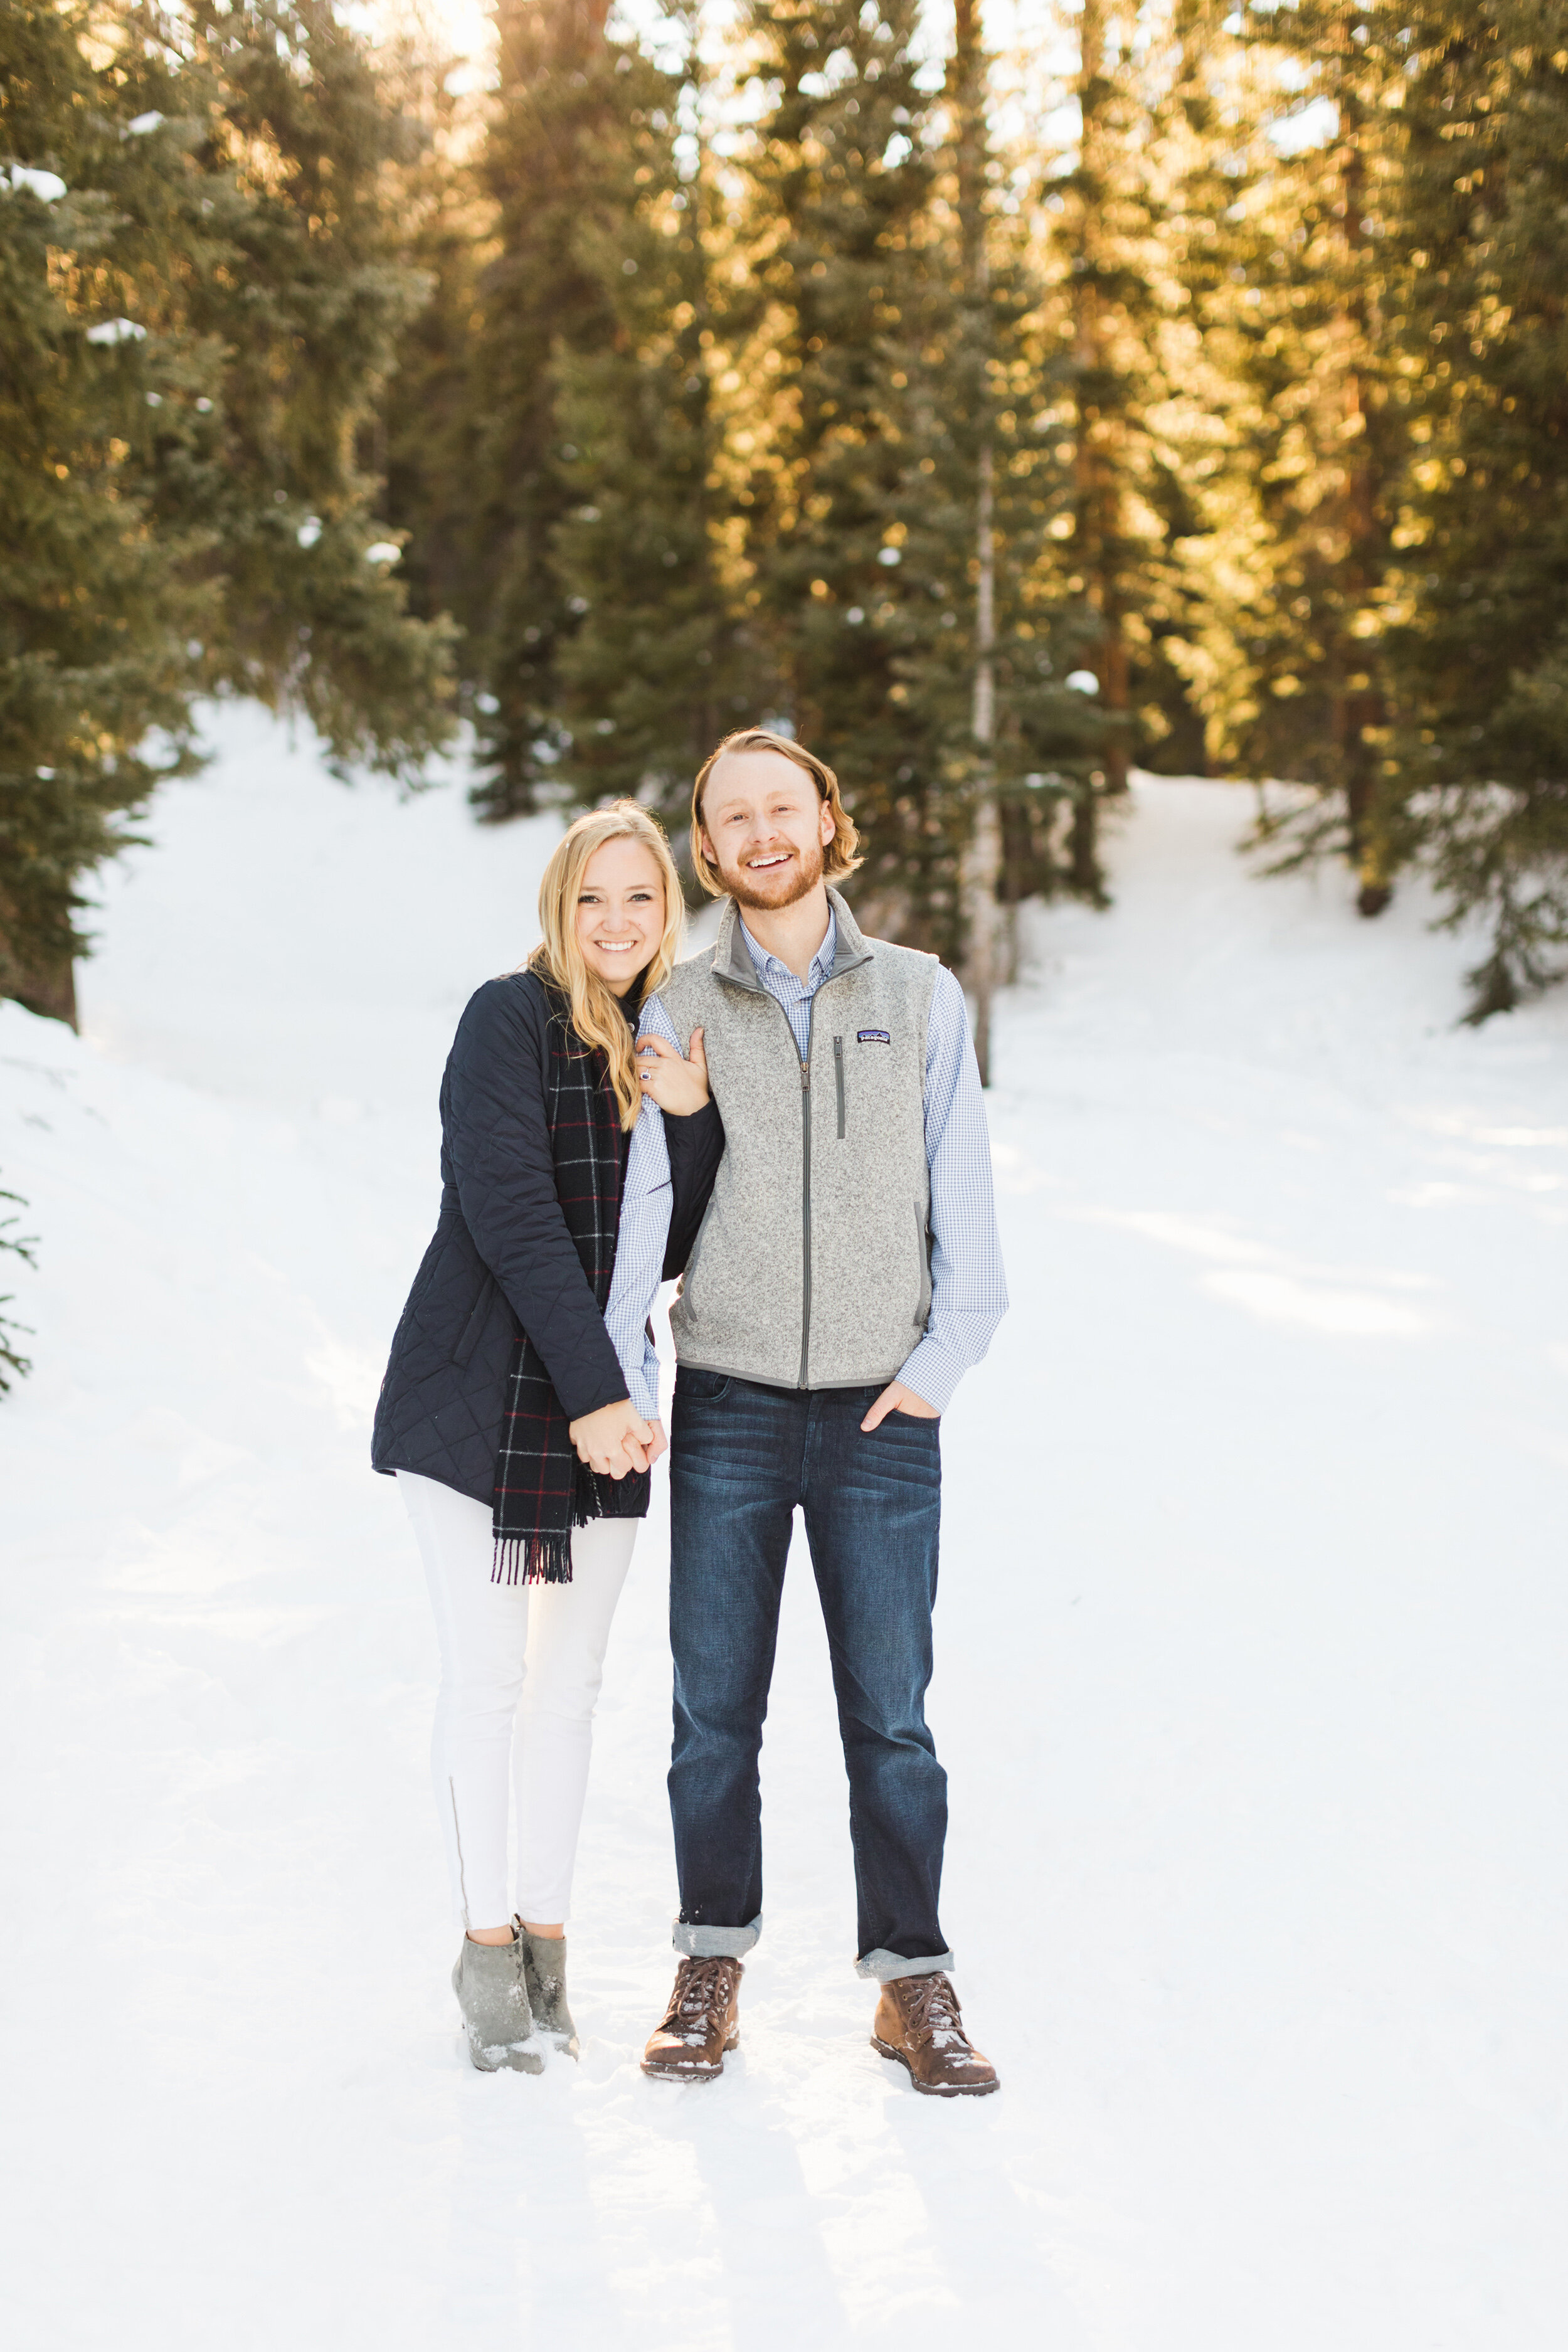 snowy-colorado-engagement-photos-in-the-forest-by-jackie-cooper-photo-09.jpg